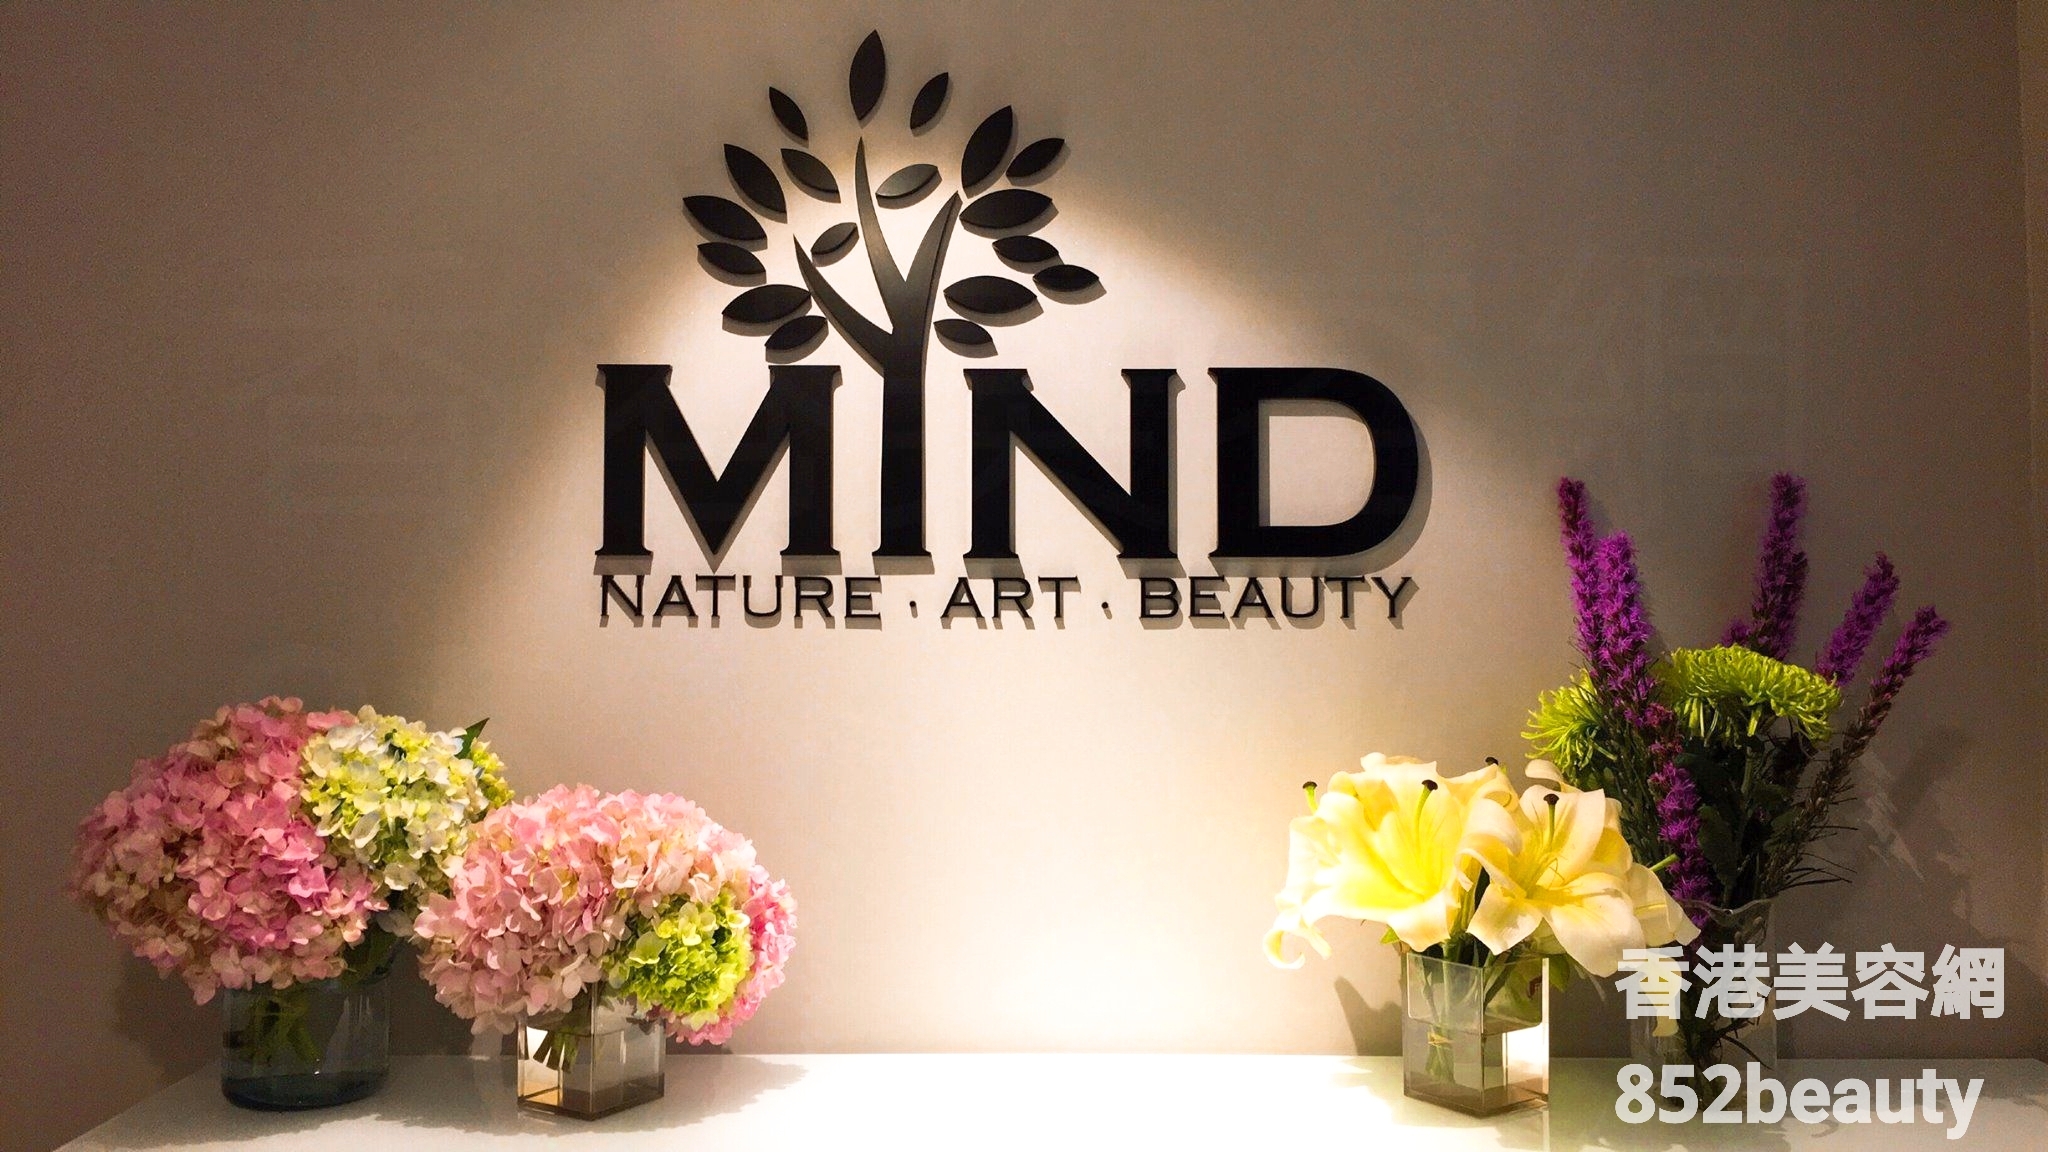 Hair Removal: MIND nature art beauty